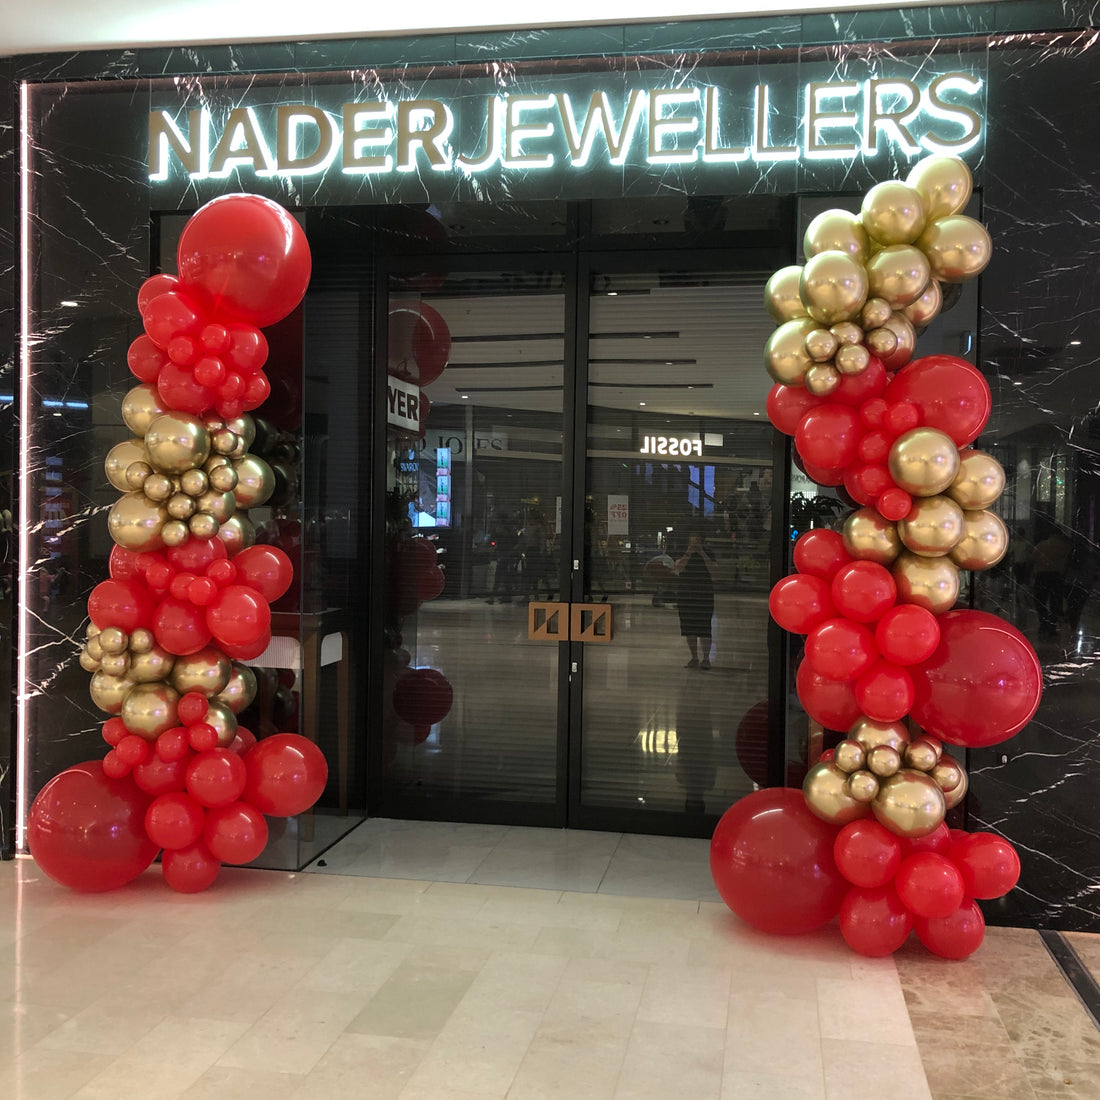 Nader Jewellers Boxing Day Sale